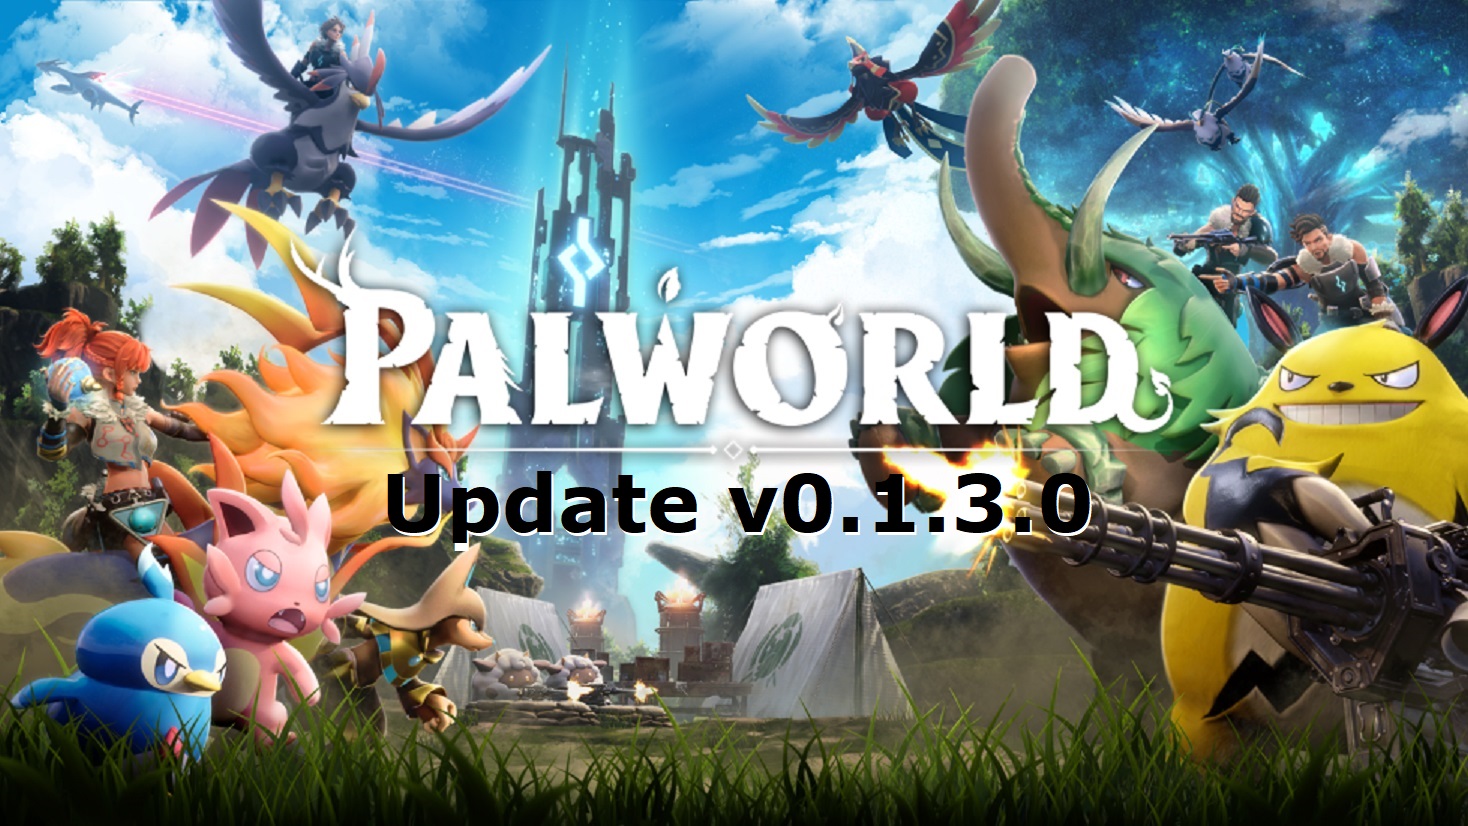 palworld update 0.1.3.0 featured image 1